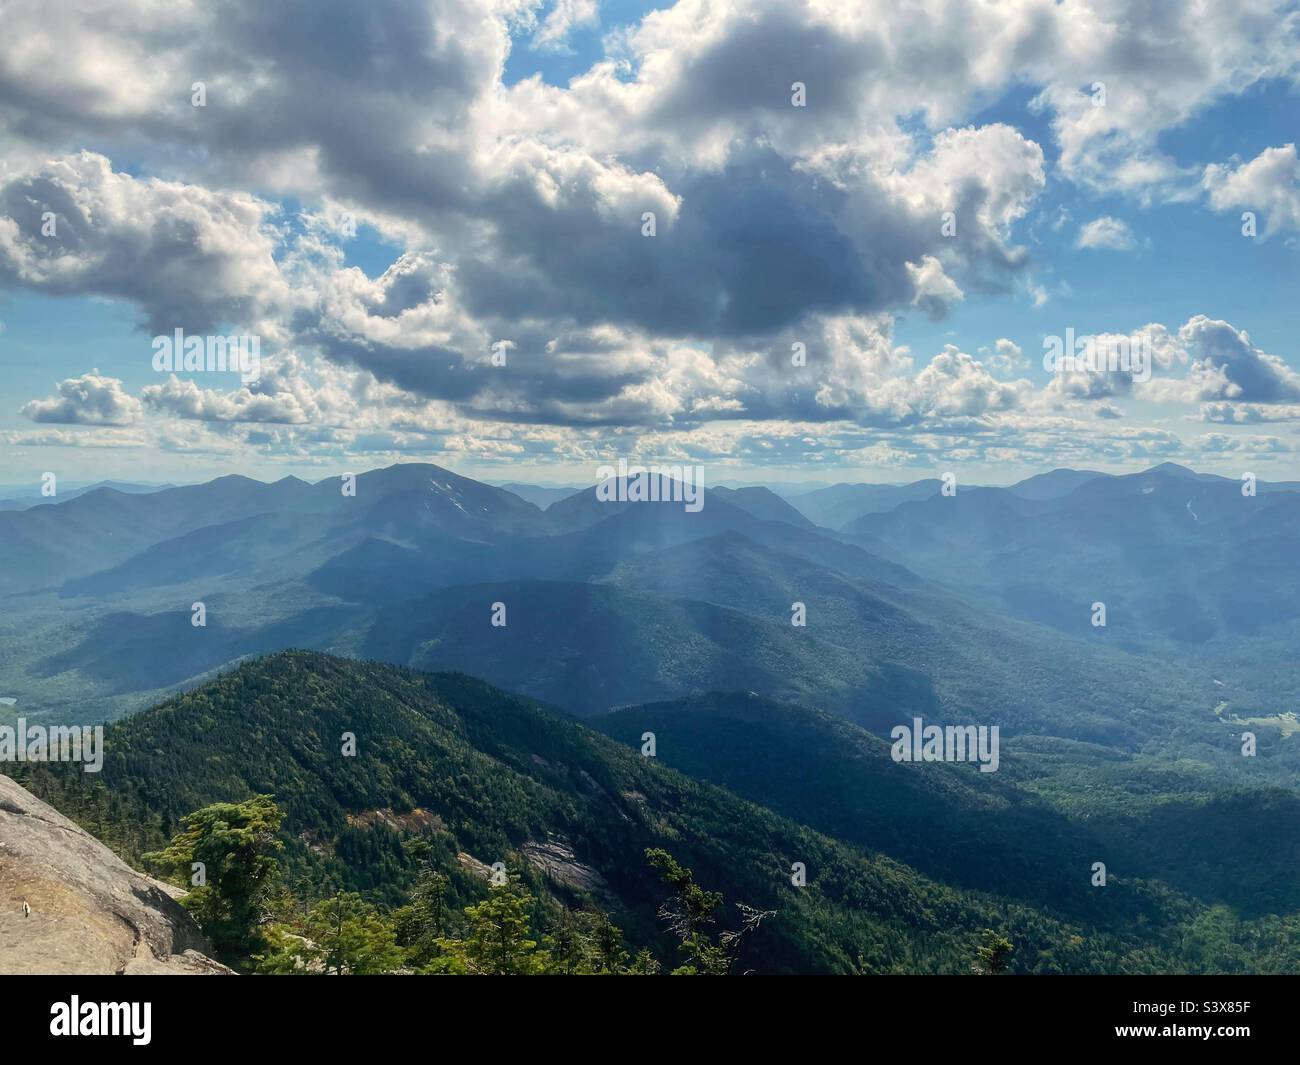 The high peaks of the Adirondack Mountains mountains in upstate New York, Stock Photo